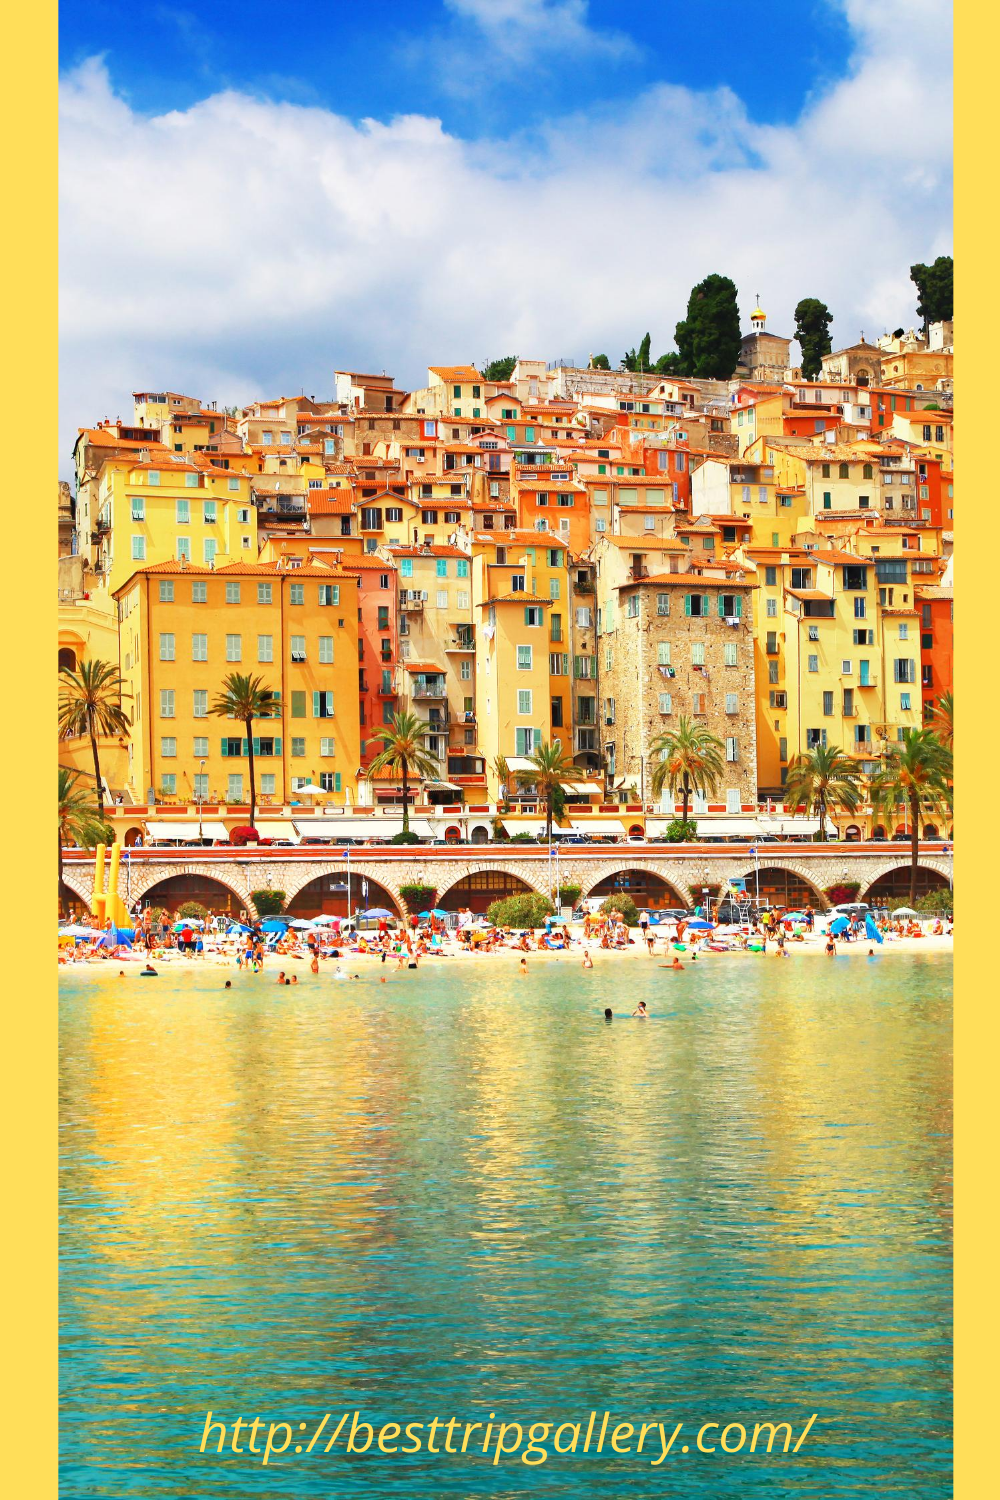 Photo of Menton By Best Trip Gallery